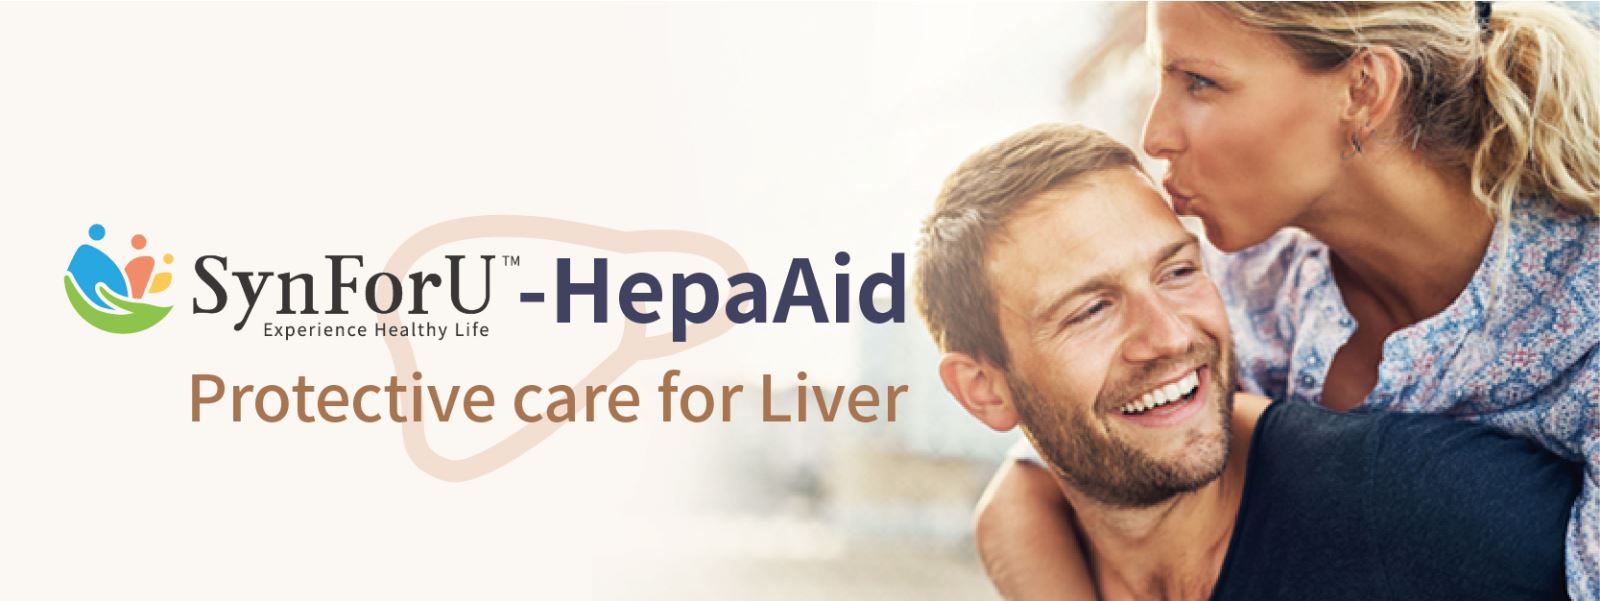 SynForU-HepaAid Protective care for Liver